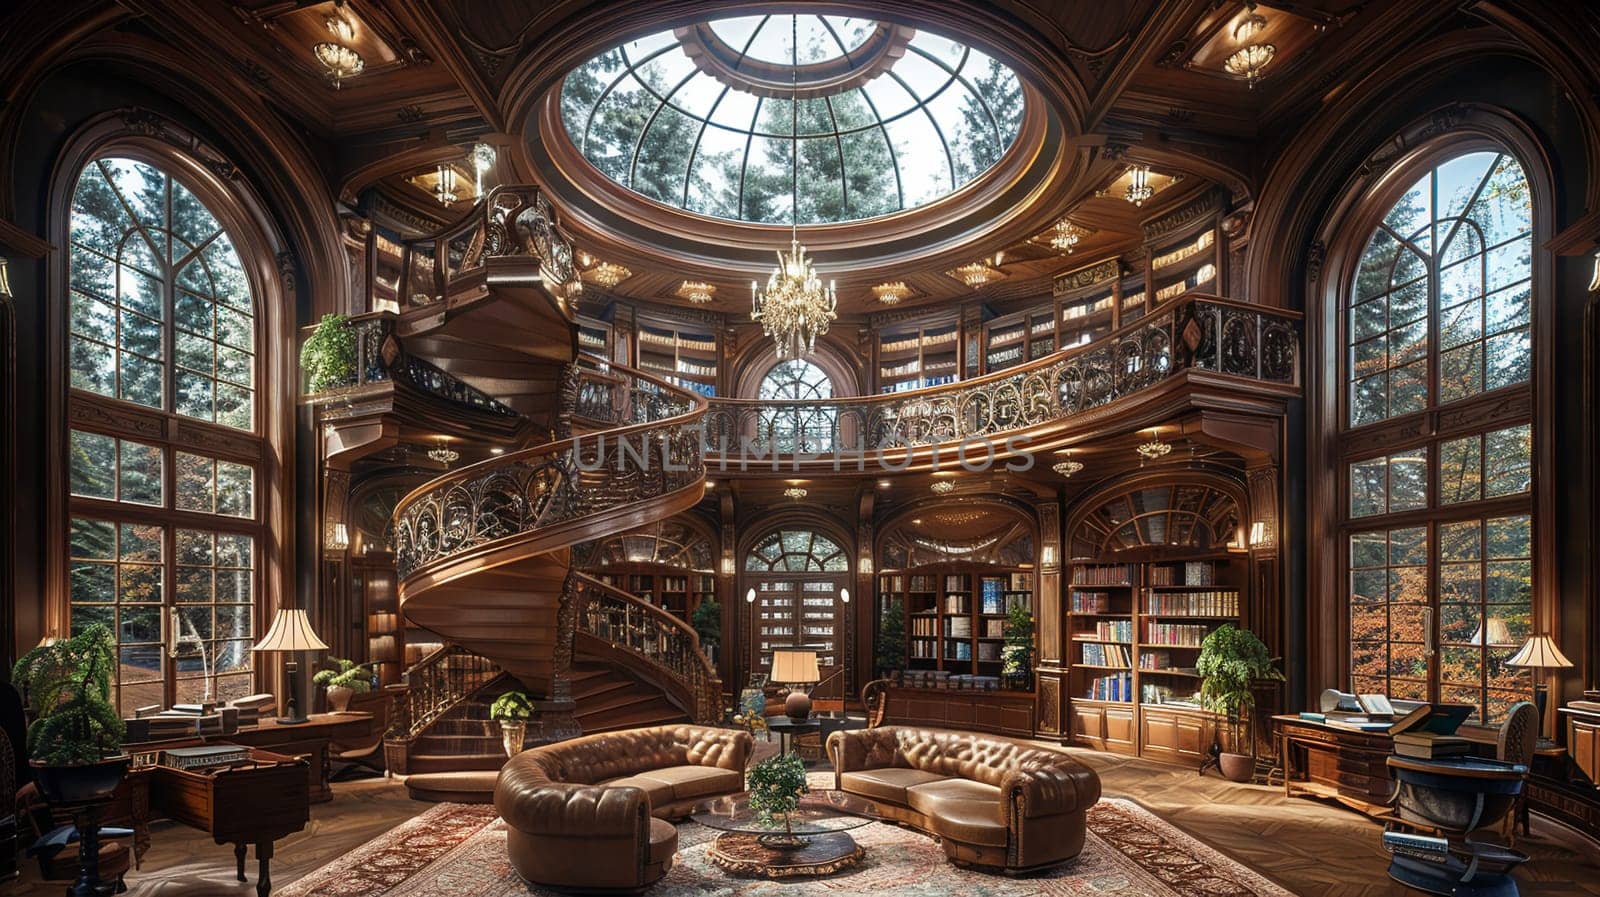 Grand library with a spiral staircase and domed ceiling